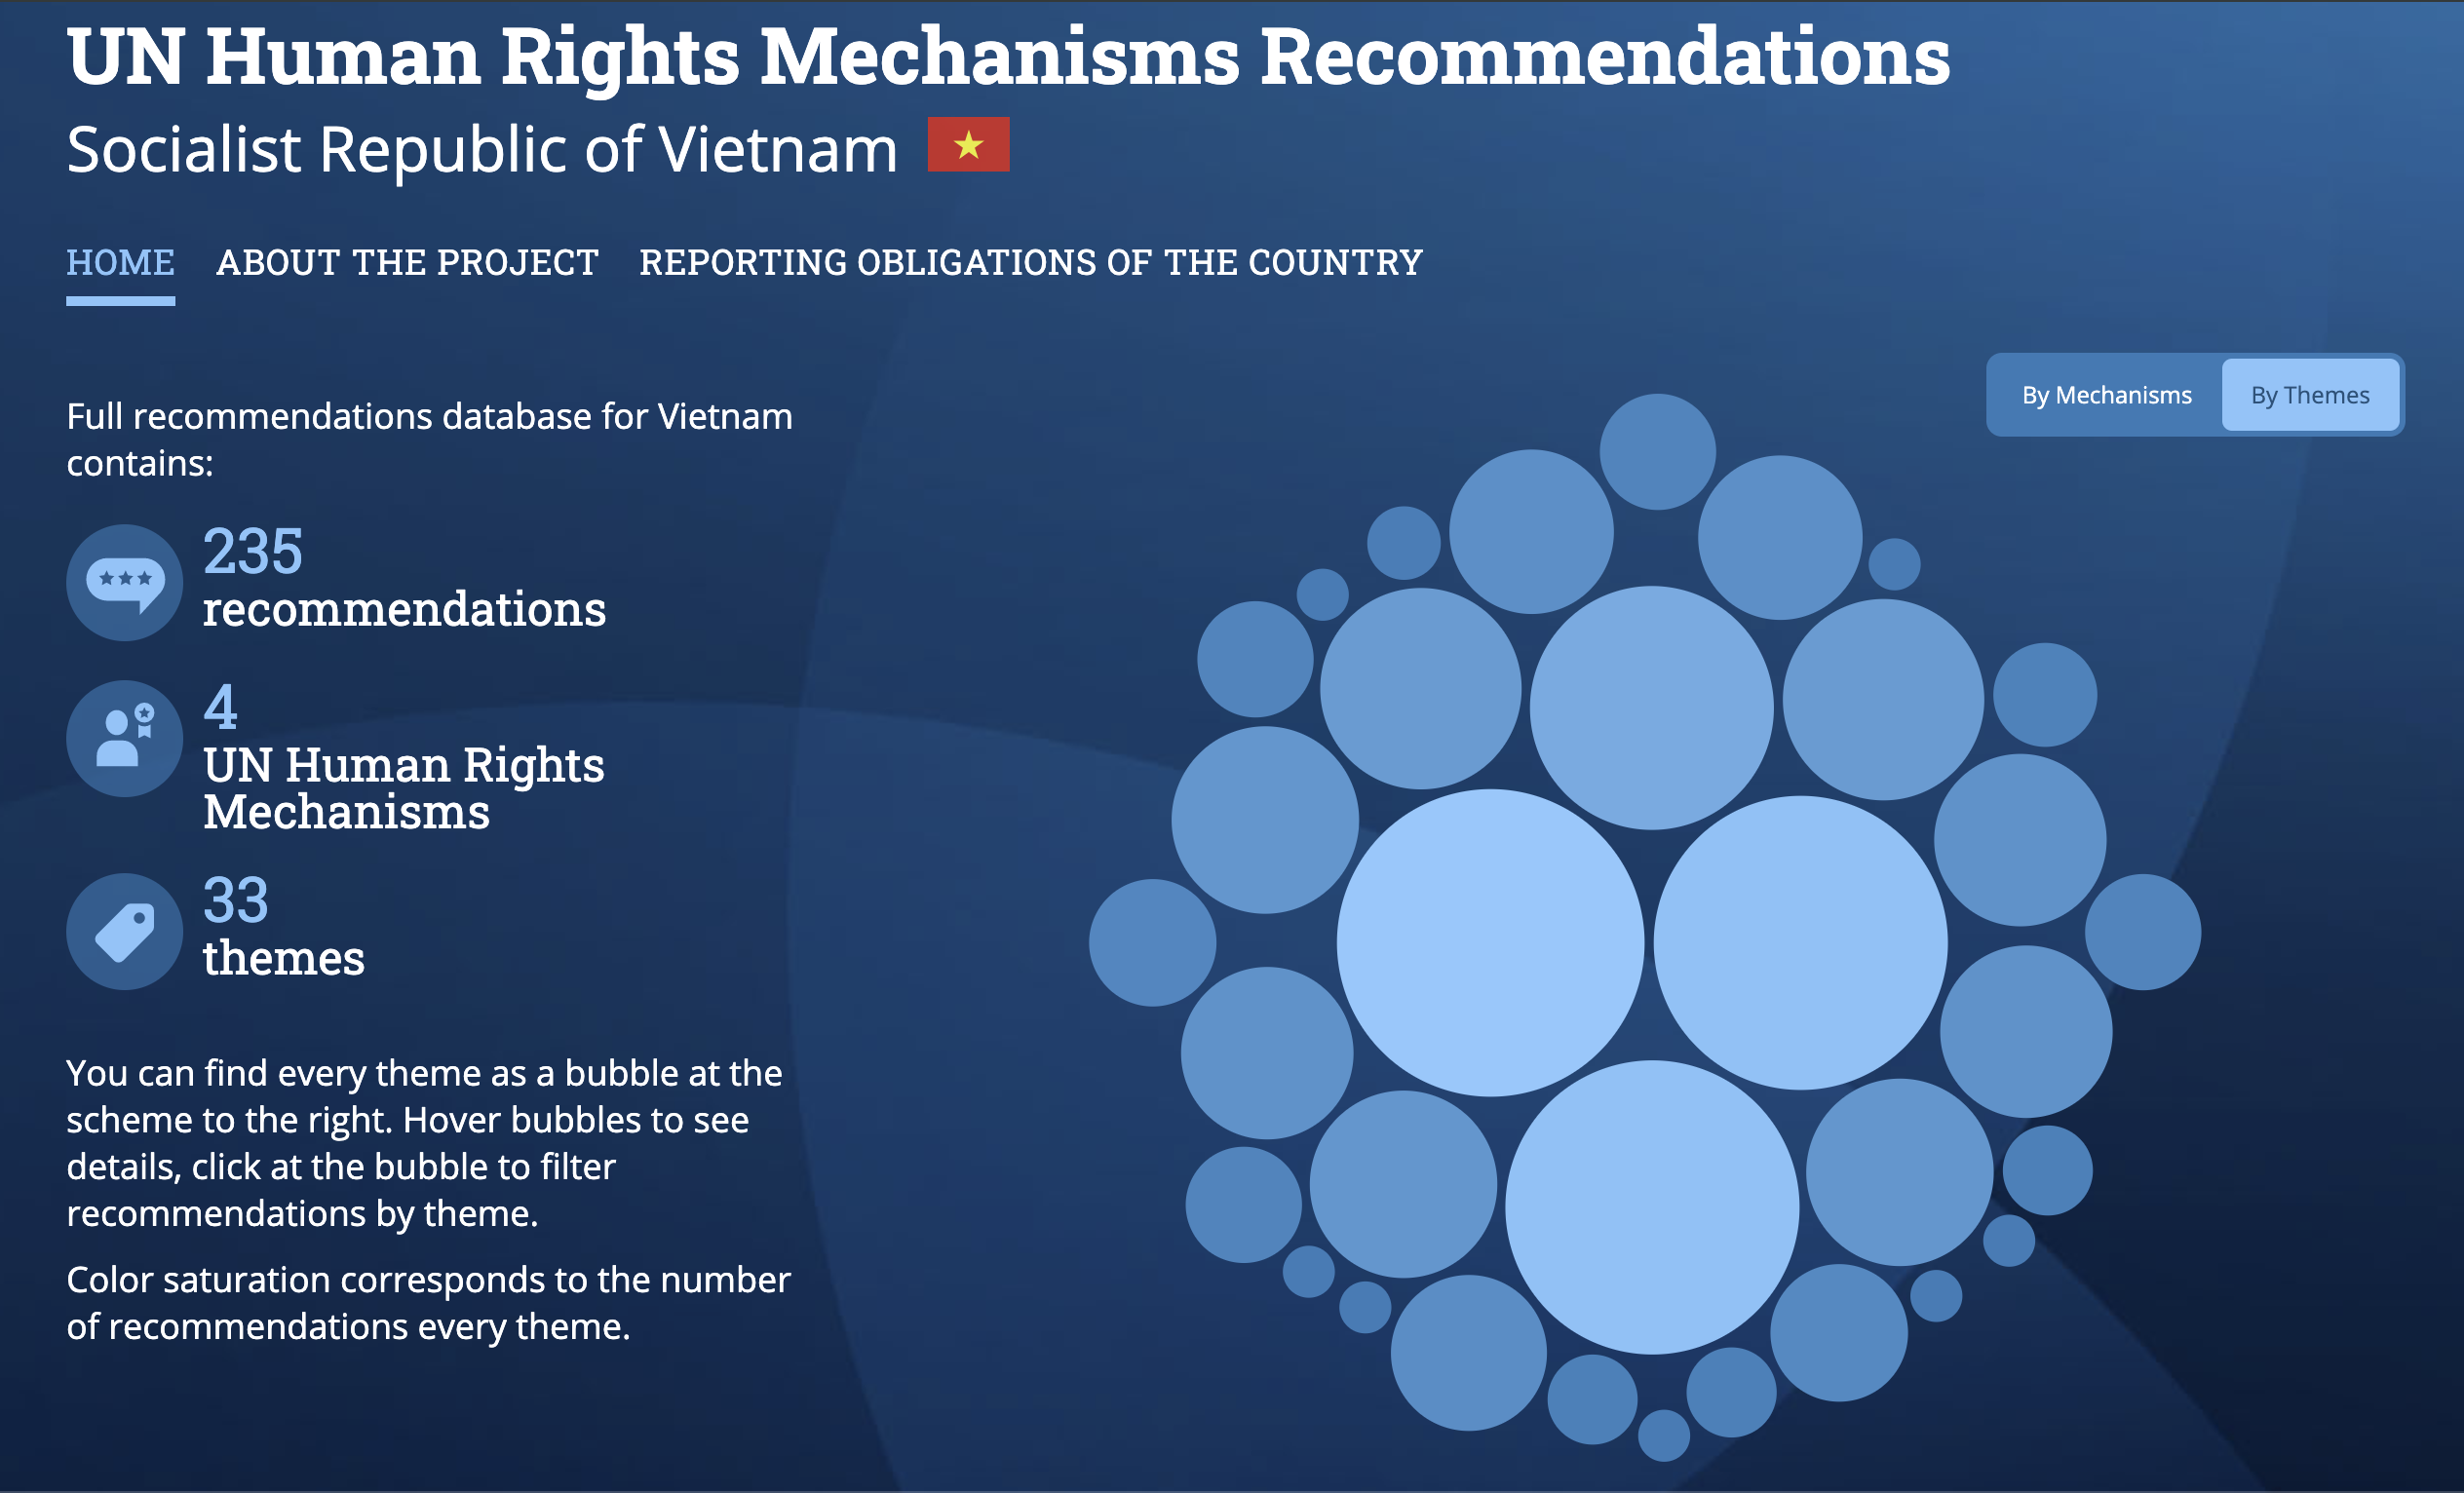 The Centre launches online tools to track recommendations issued by UN HR Mechanisms